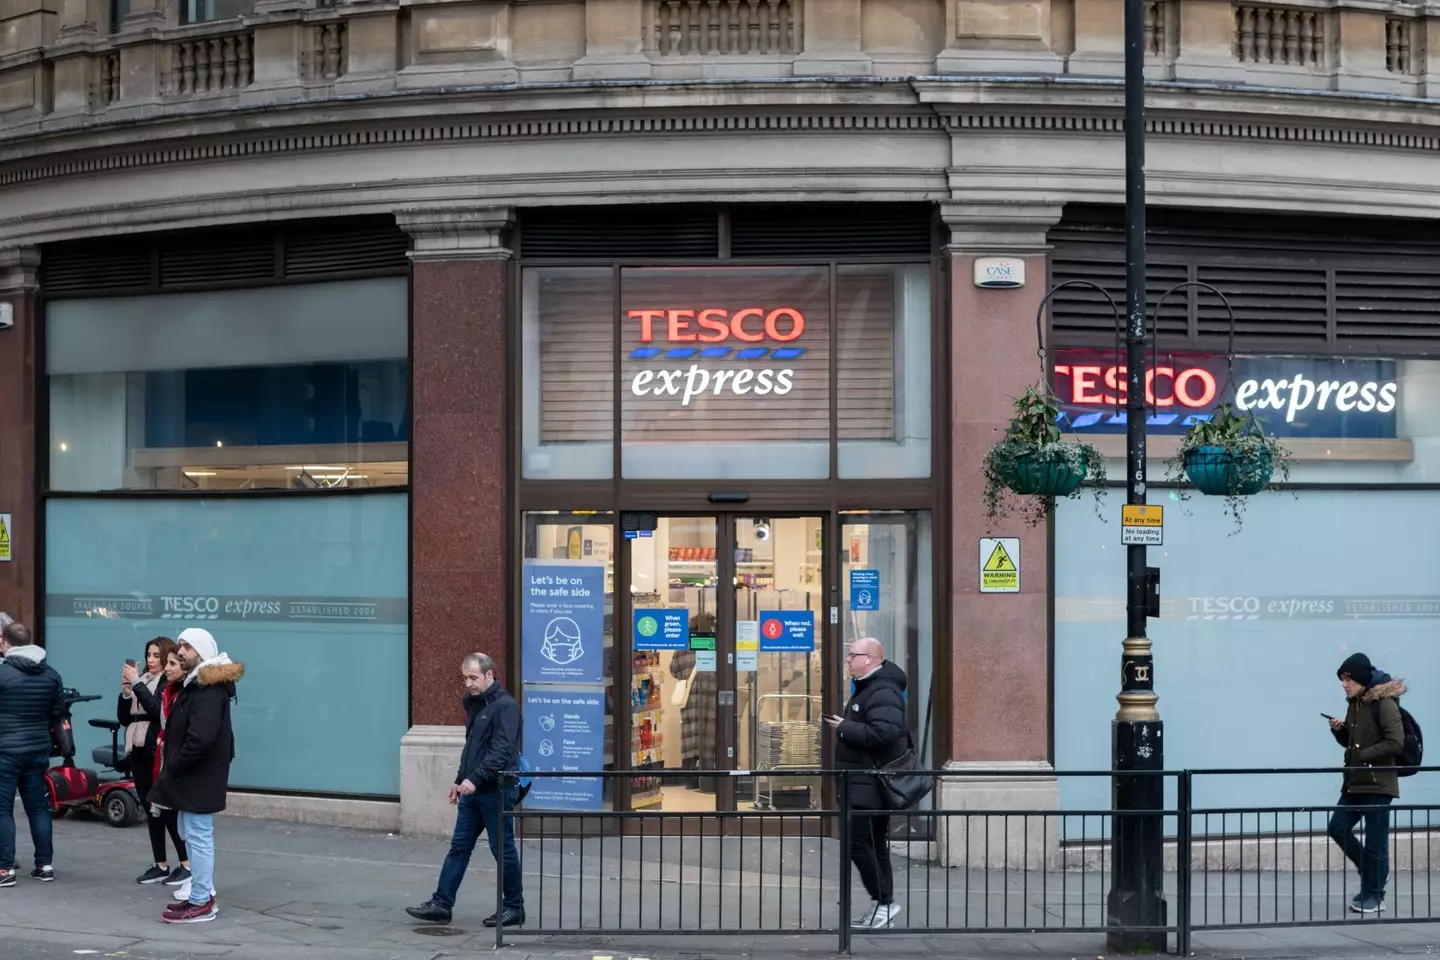 Tesco will not buy any more Russian products.